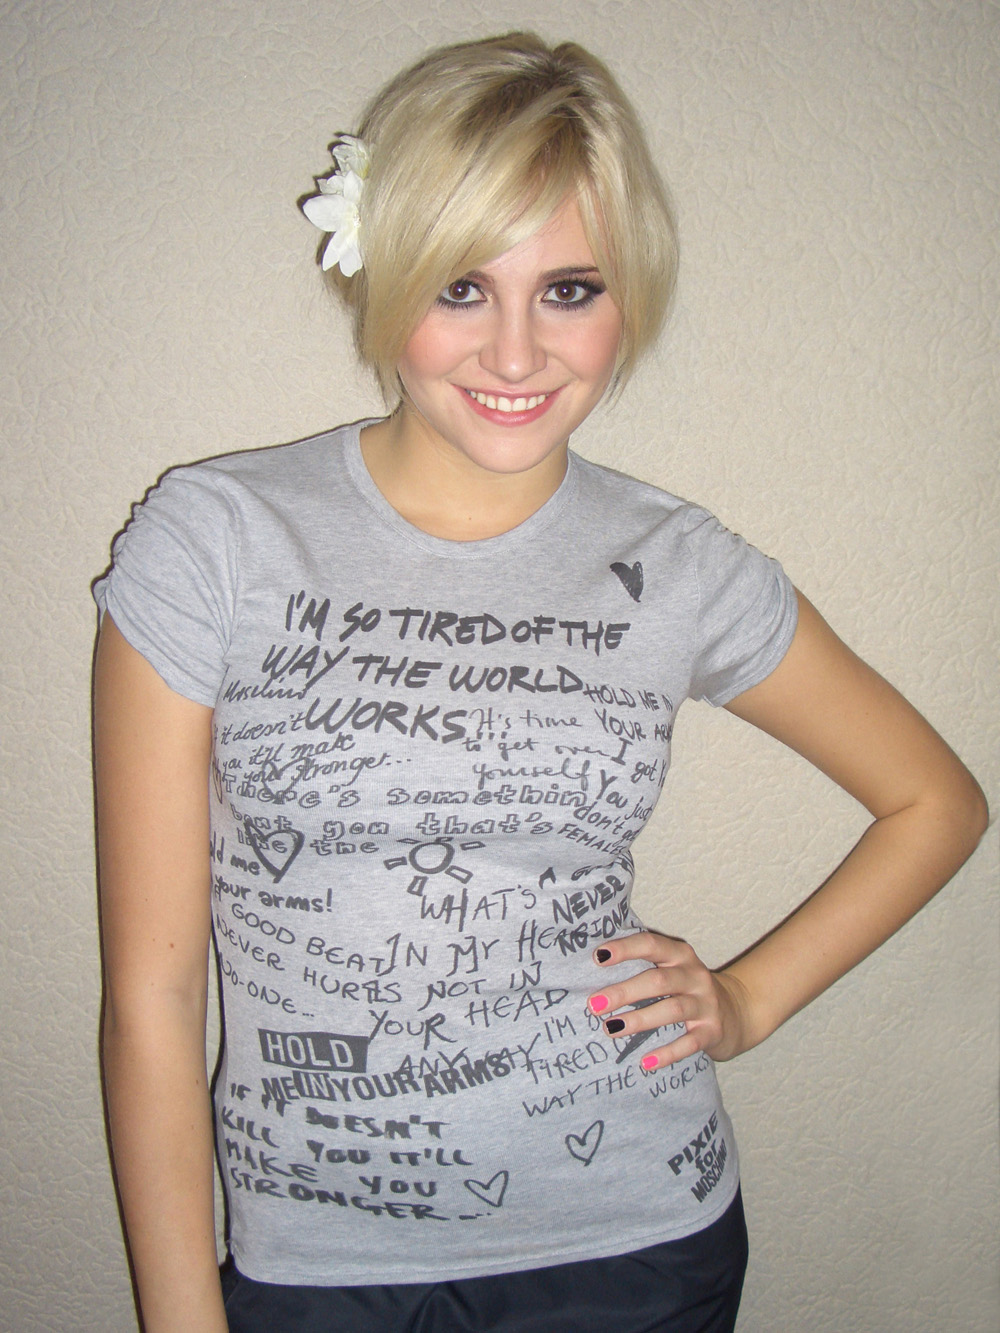 Moschino Web Exclusive: Limited Edition Tee Customized by Pixie Lott